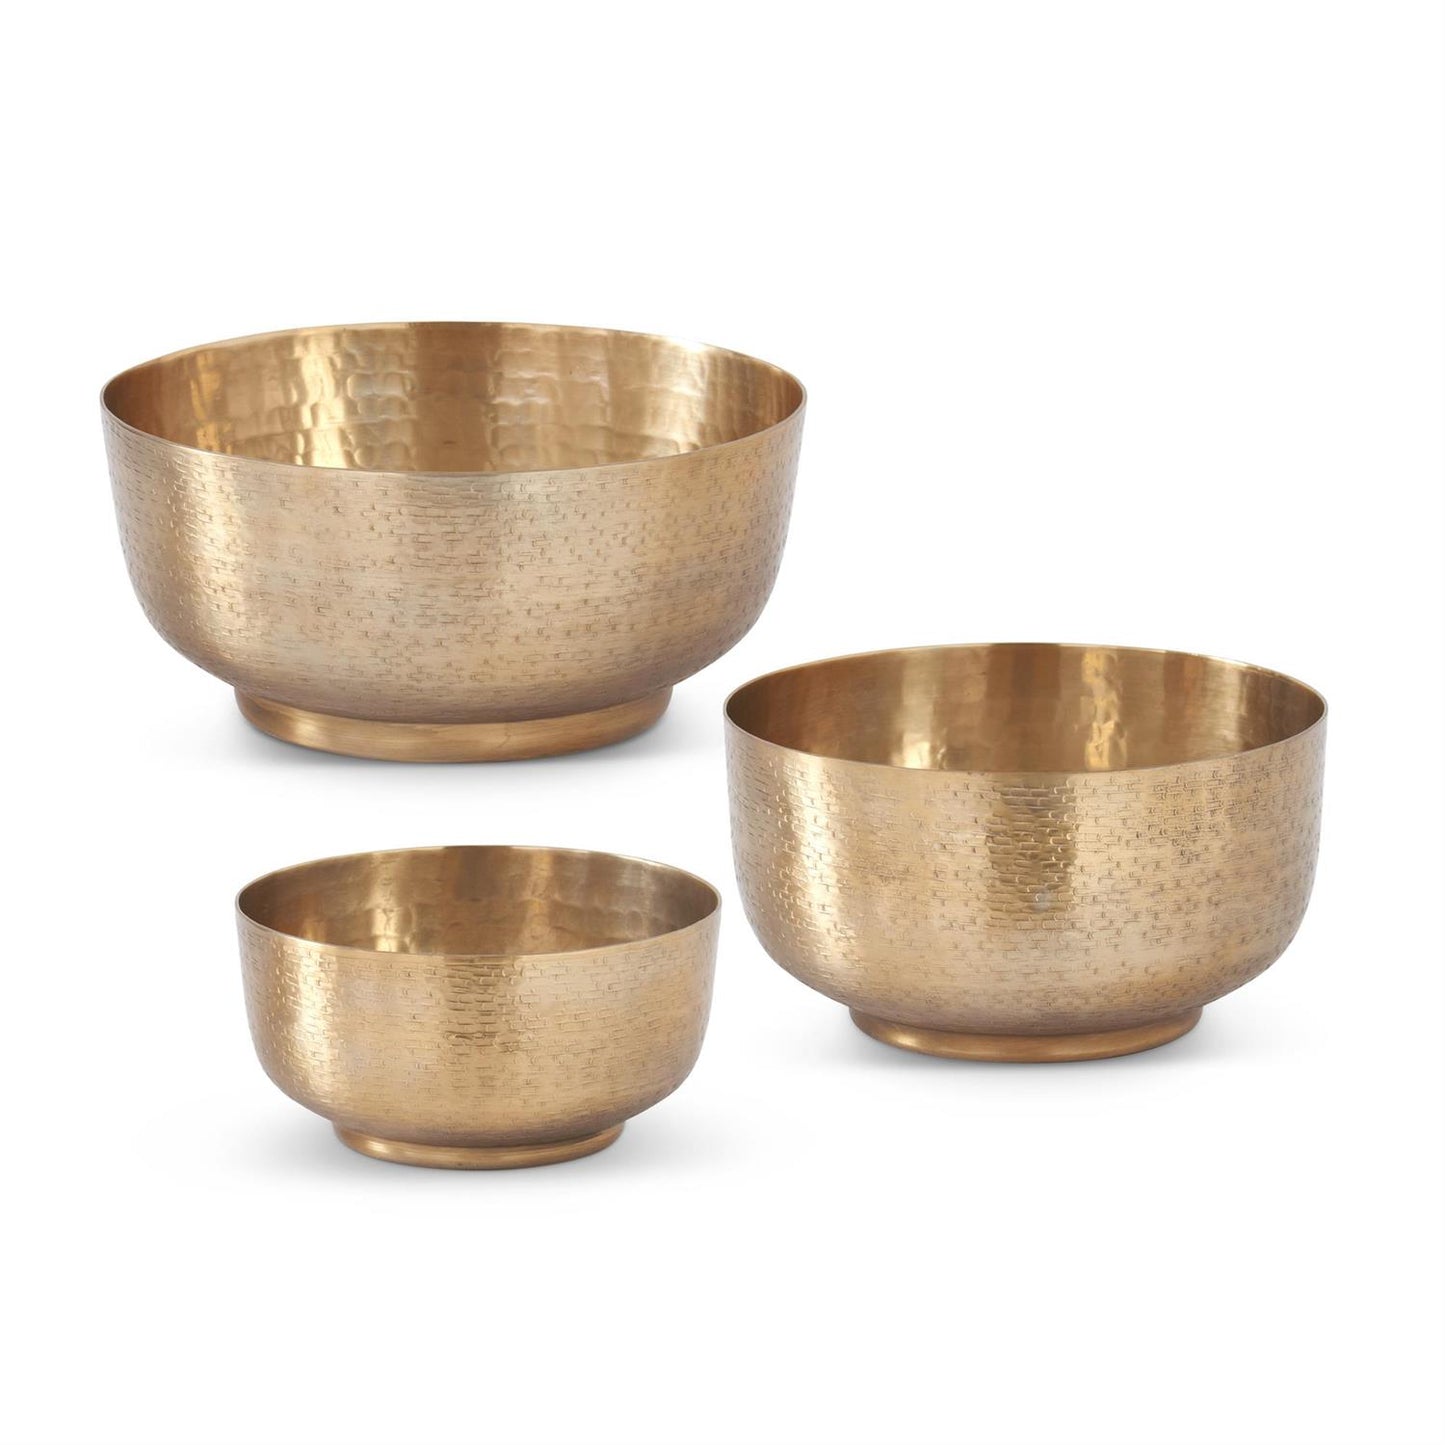 Textured Antiqued Gold Footed Bowls, Set of 3